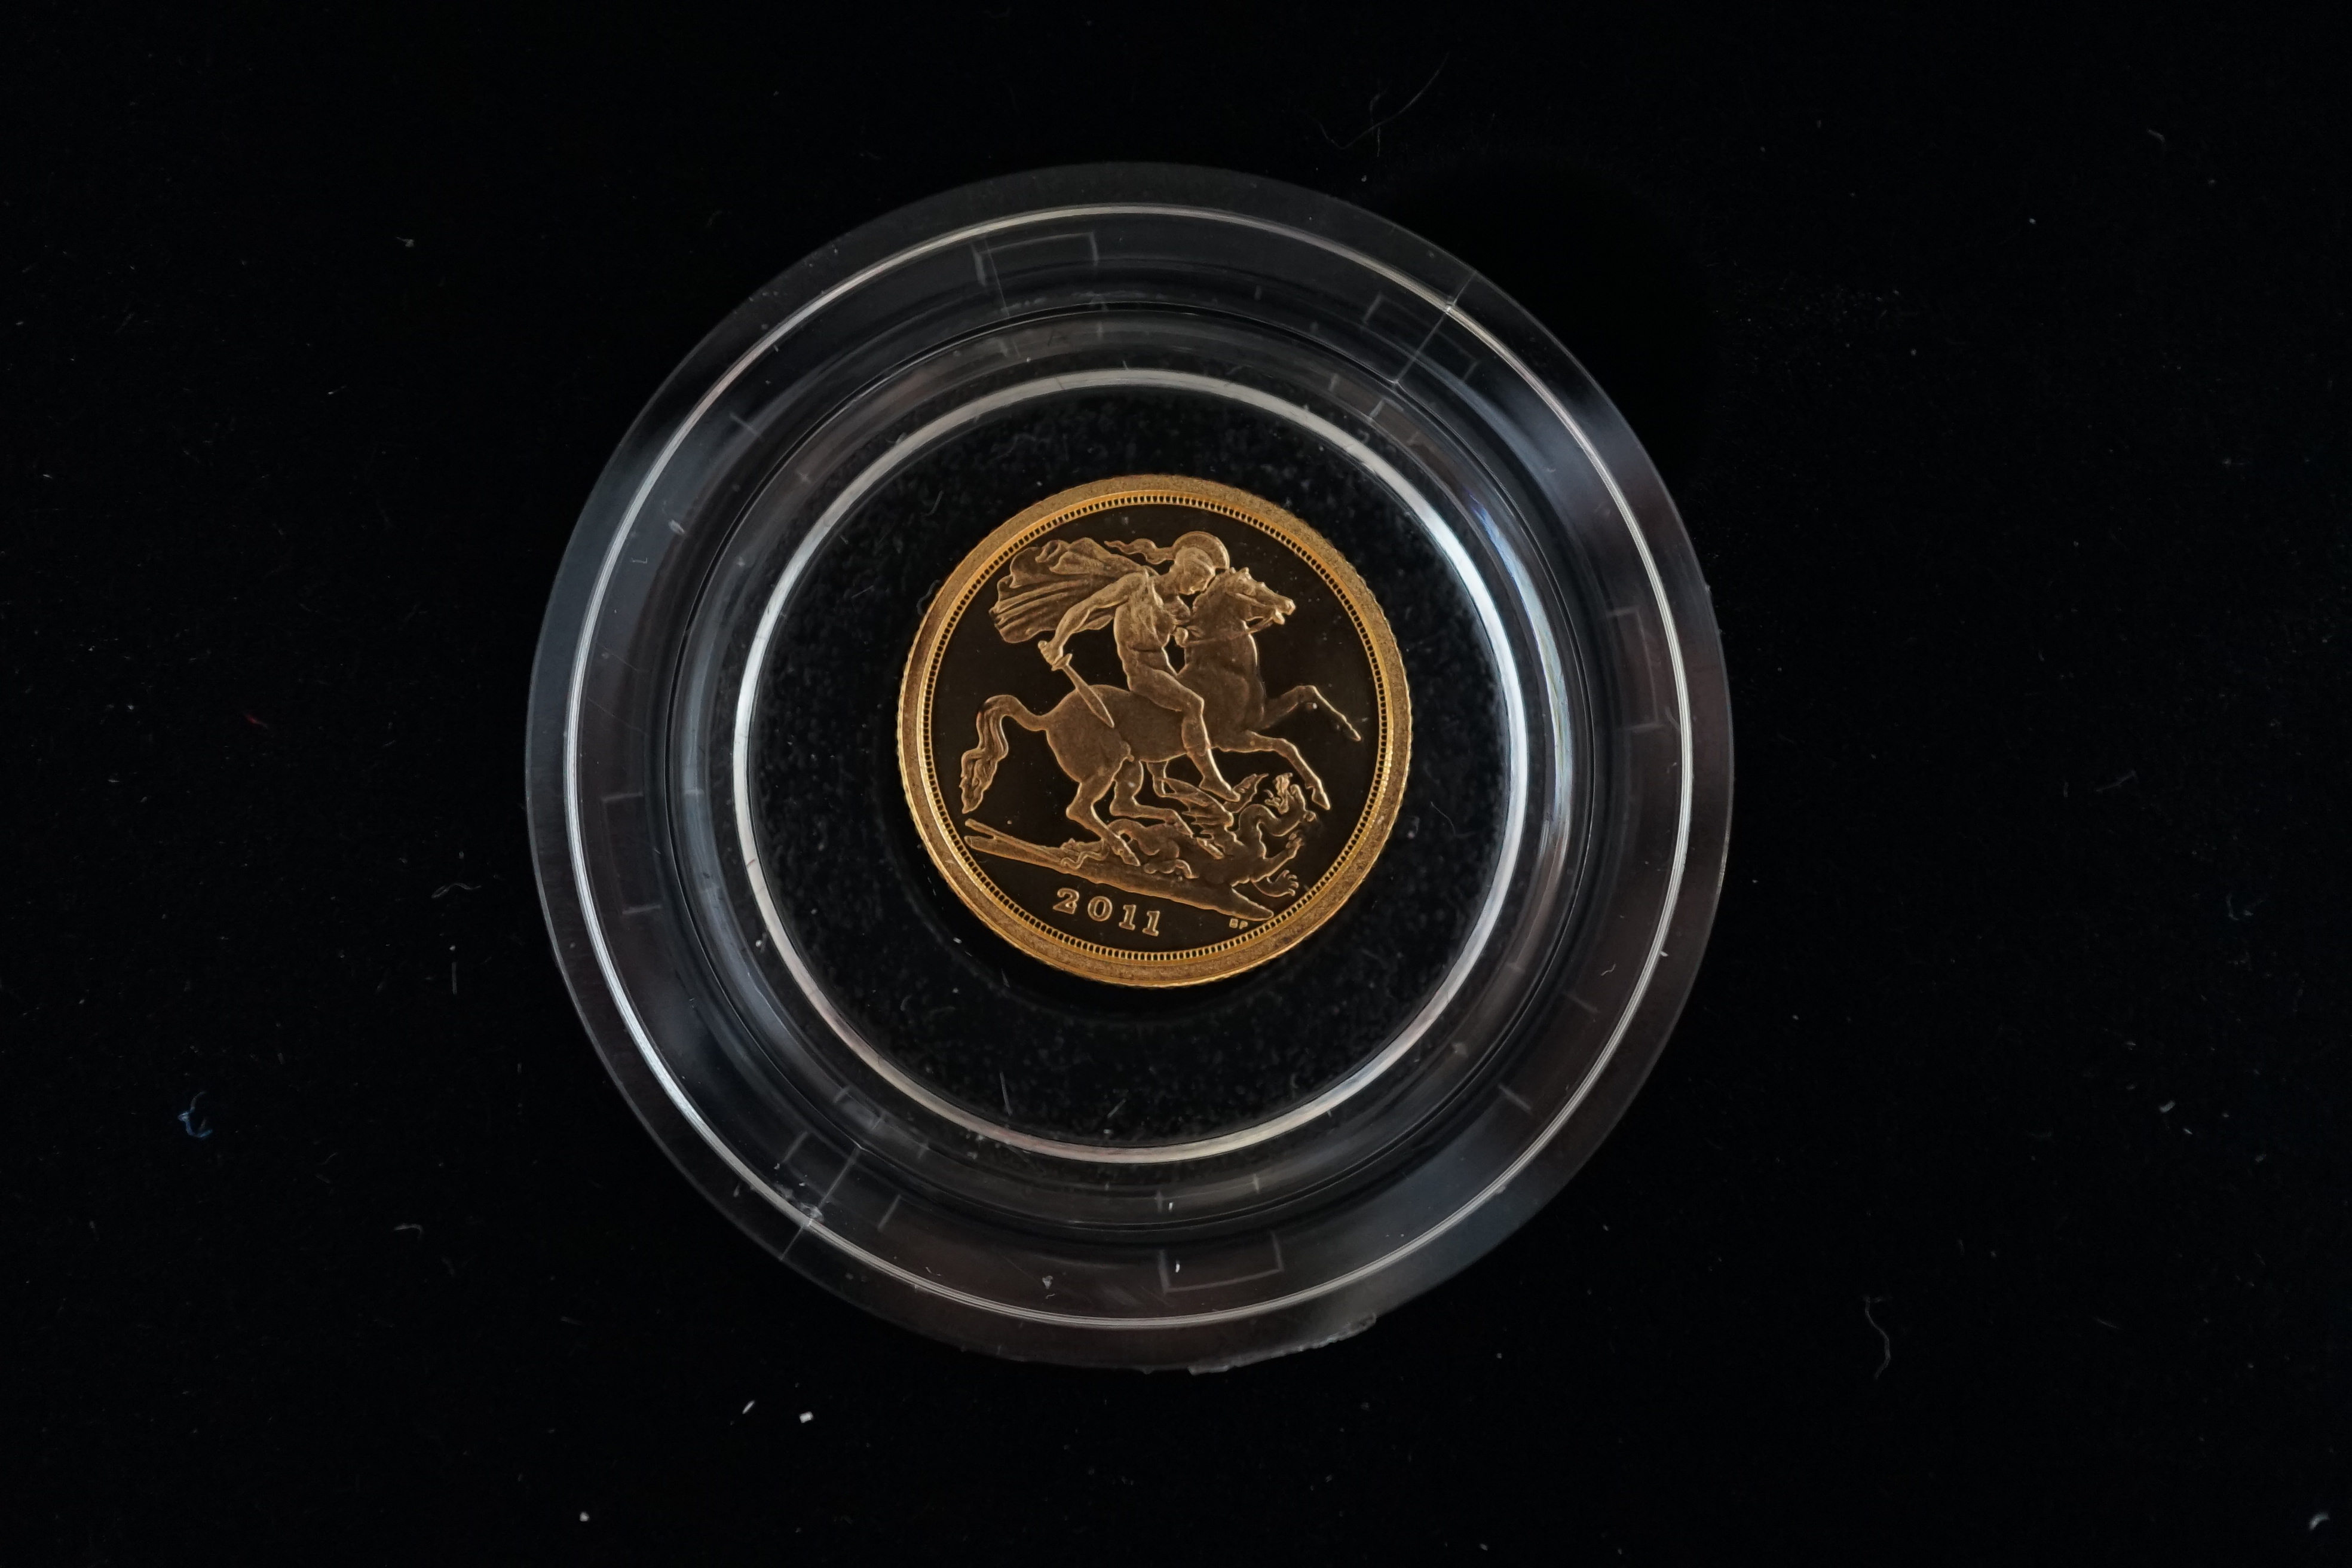 British gold coins, Elizabeth II, 2011 gold proof Sovereign three coin collection; sovereign, half sovereign and quarter sovereign, St. George and the dragon, in case of issue with certificate